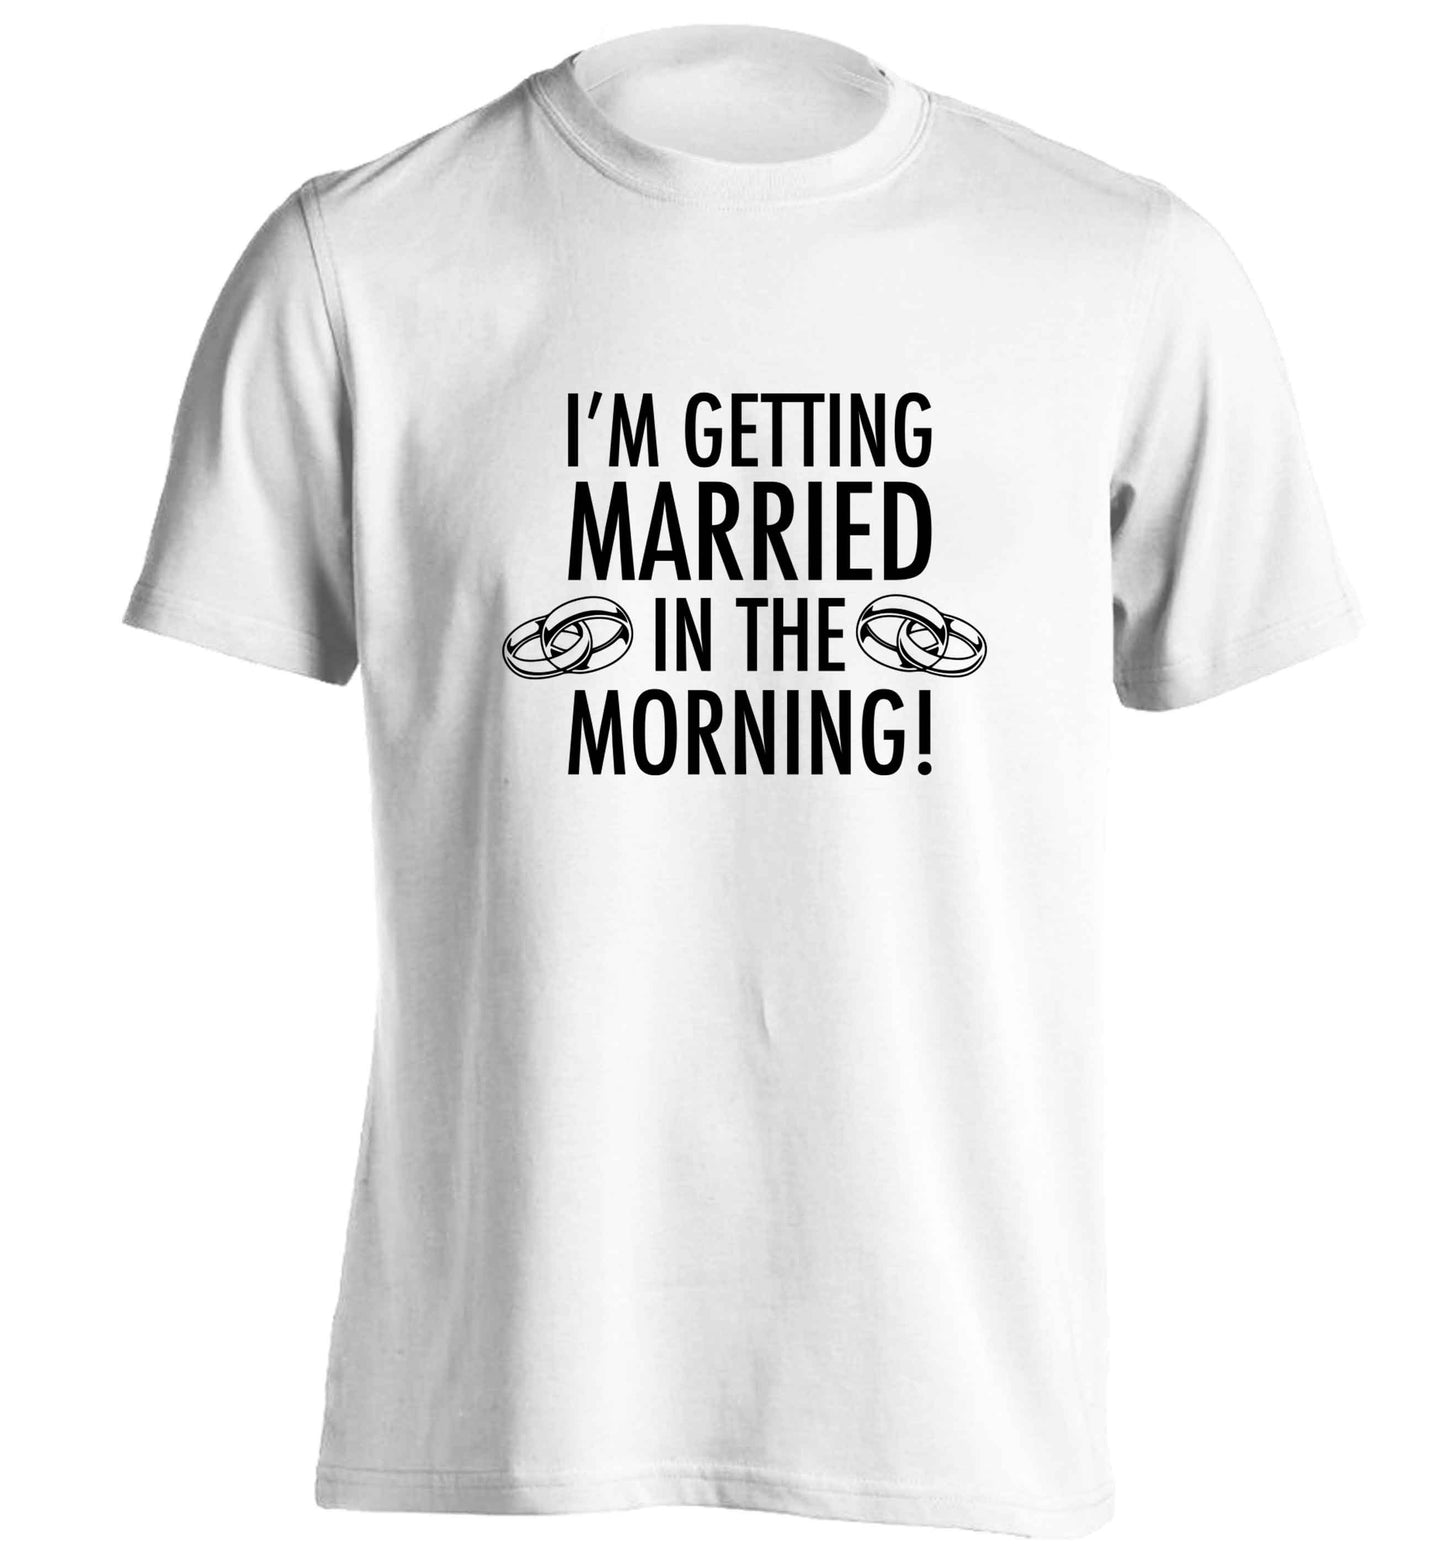 I'm getting married in the morning! adults unisex white Tshirt 2XL